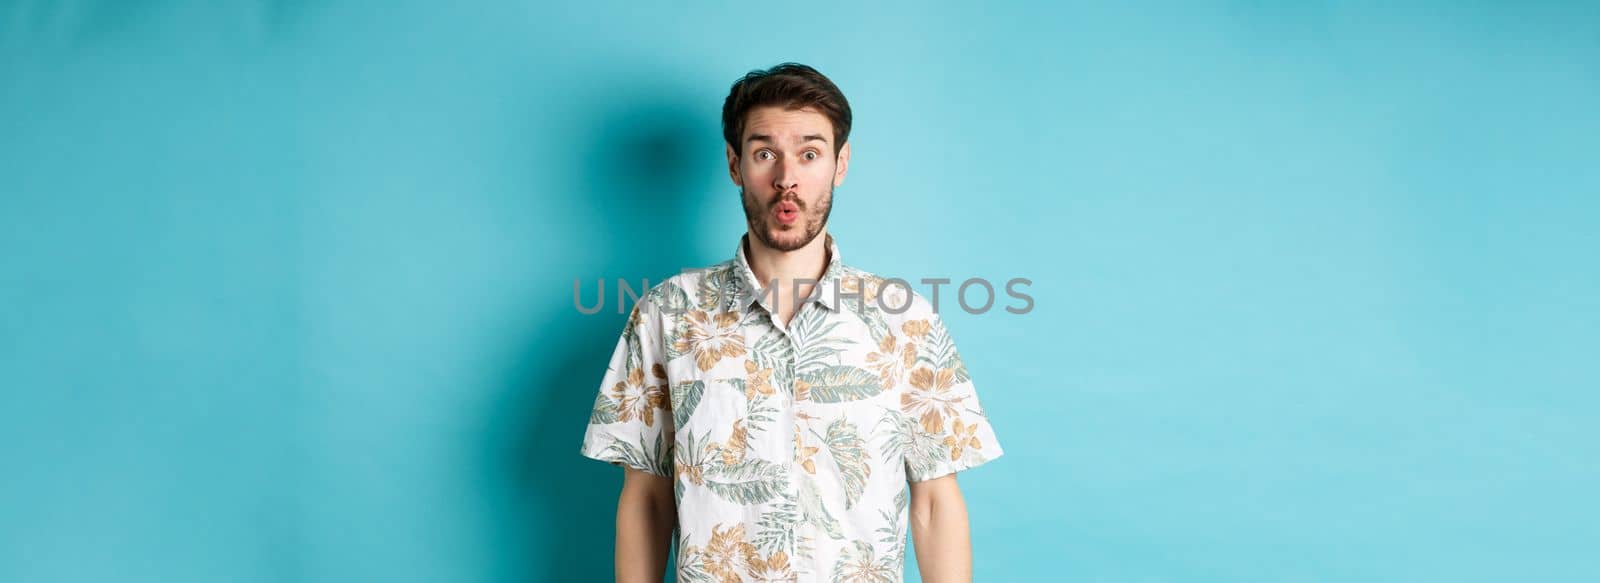 Summer holiday. Surprised tourist say wow and staring at camera, checking out awesome promo, standing in hawaiian shirt on blue background.